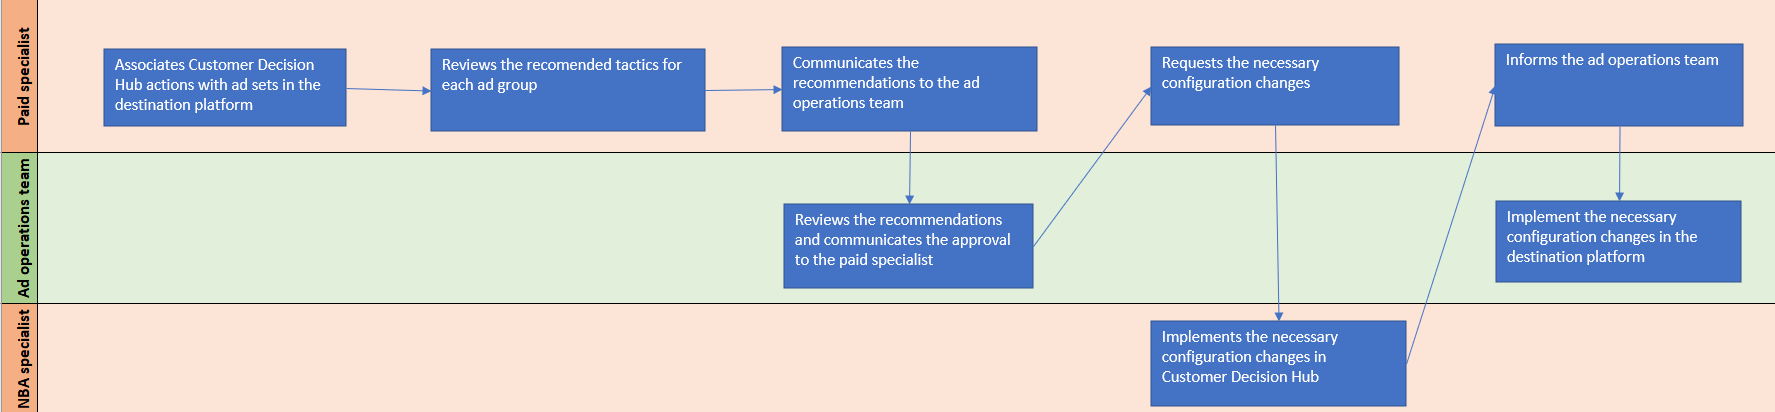 A flow diagram outlining the tasks involved in advertising on paid destinations with Paid Media Manager